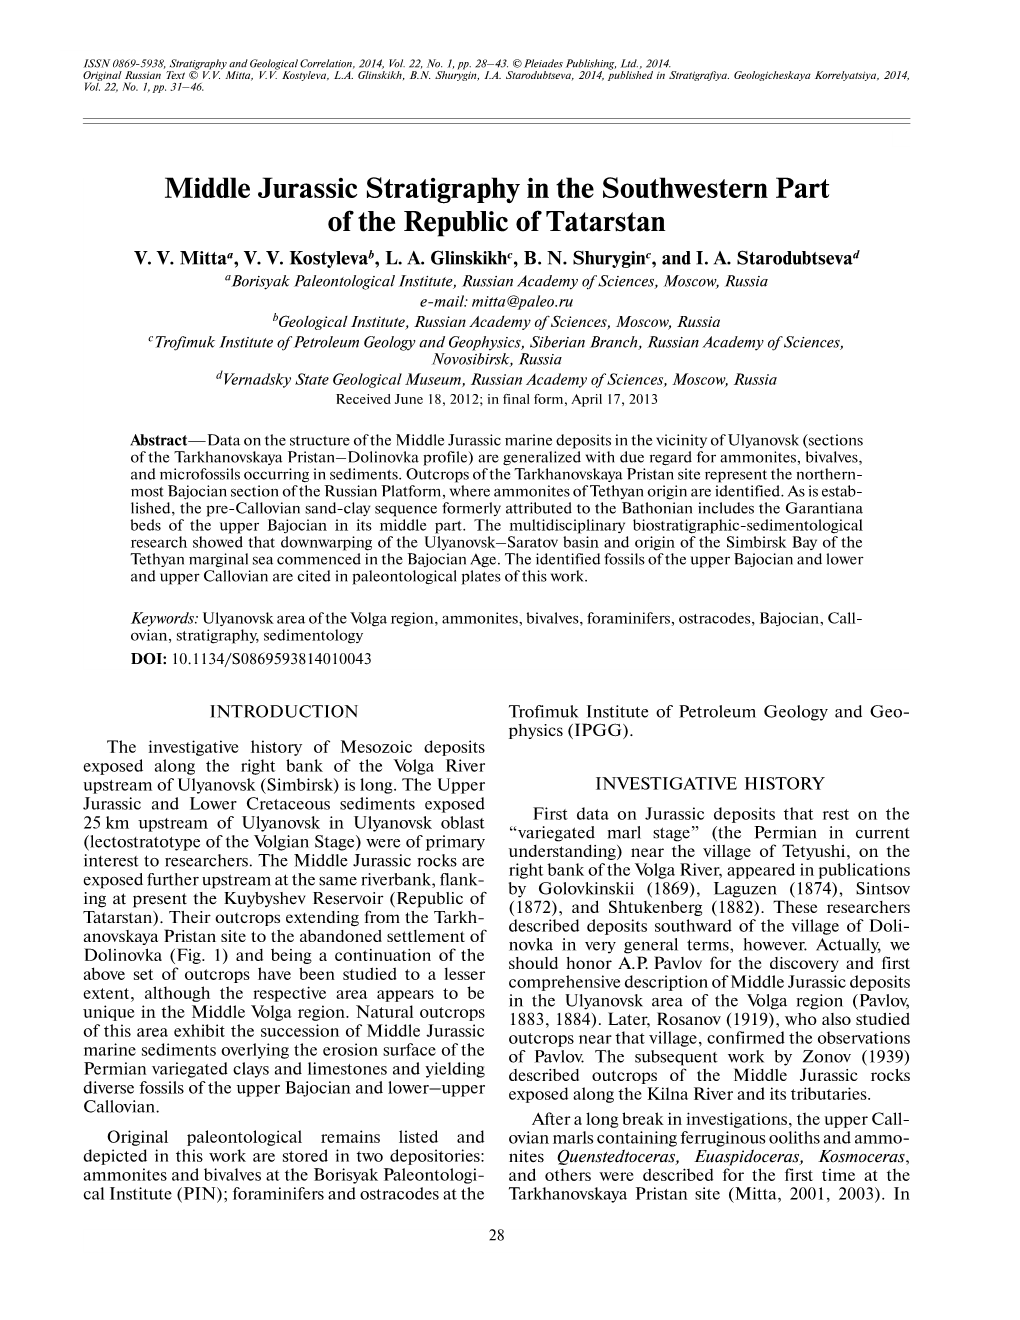 Middle Jurassic Stratigraphy in the Southwestern Part of the Republic of Tatarstan V